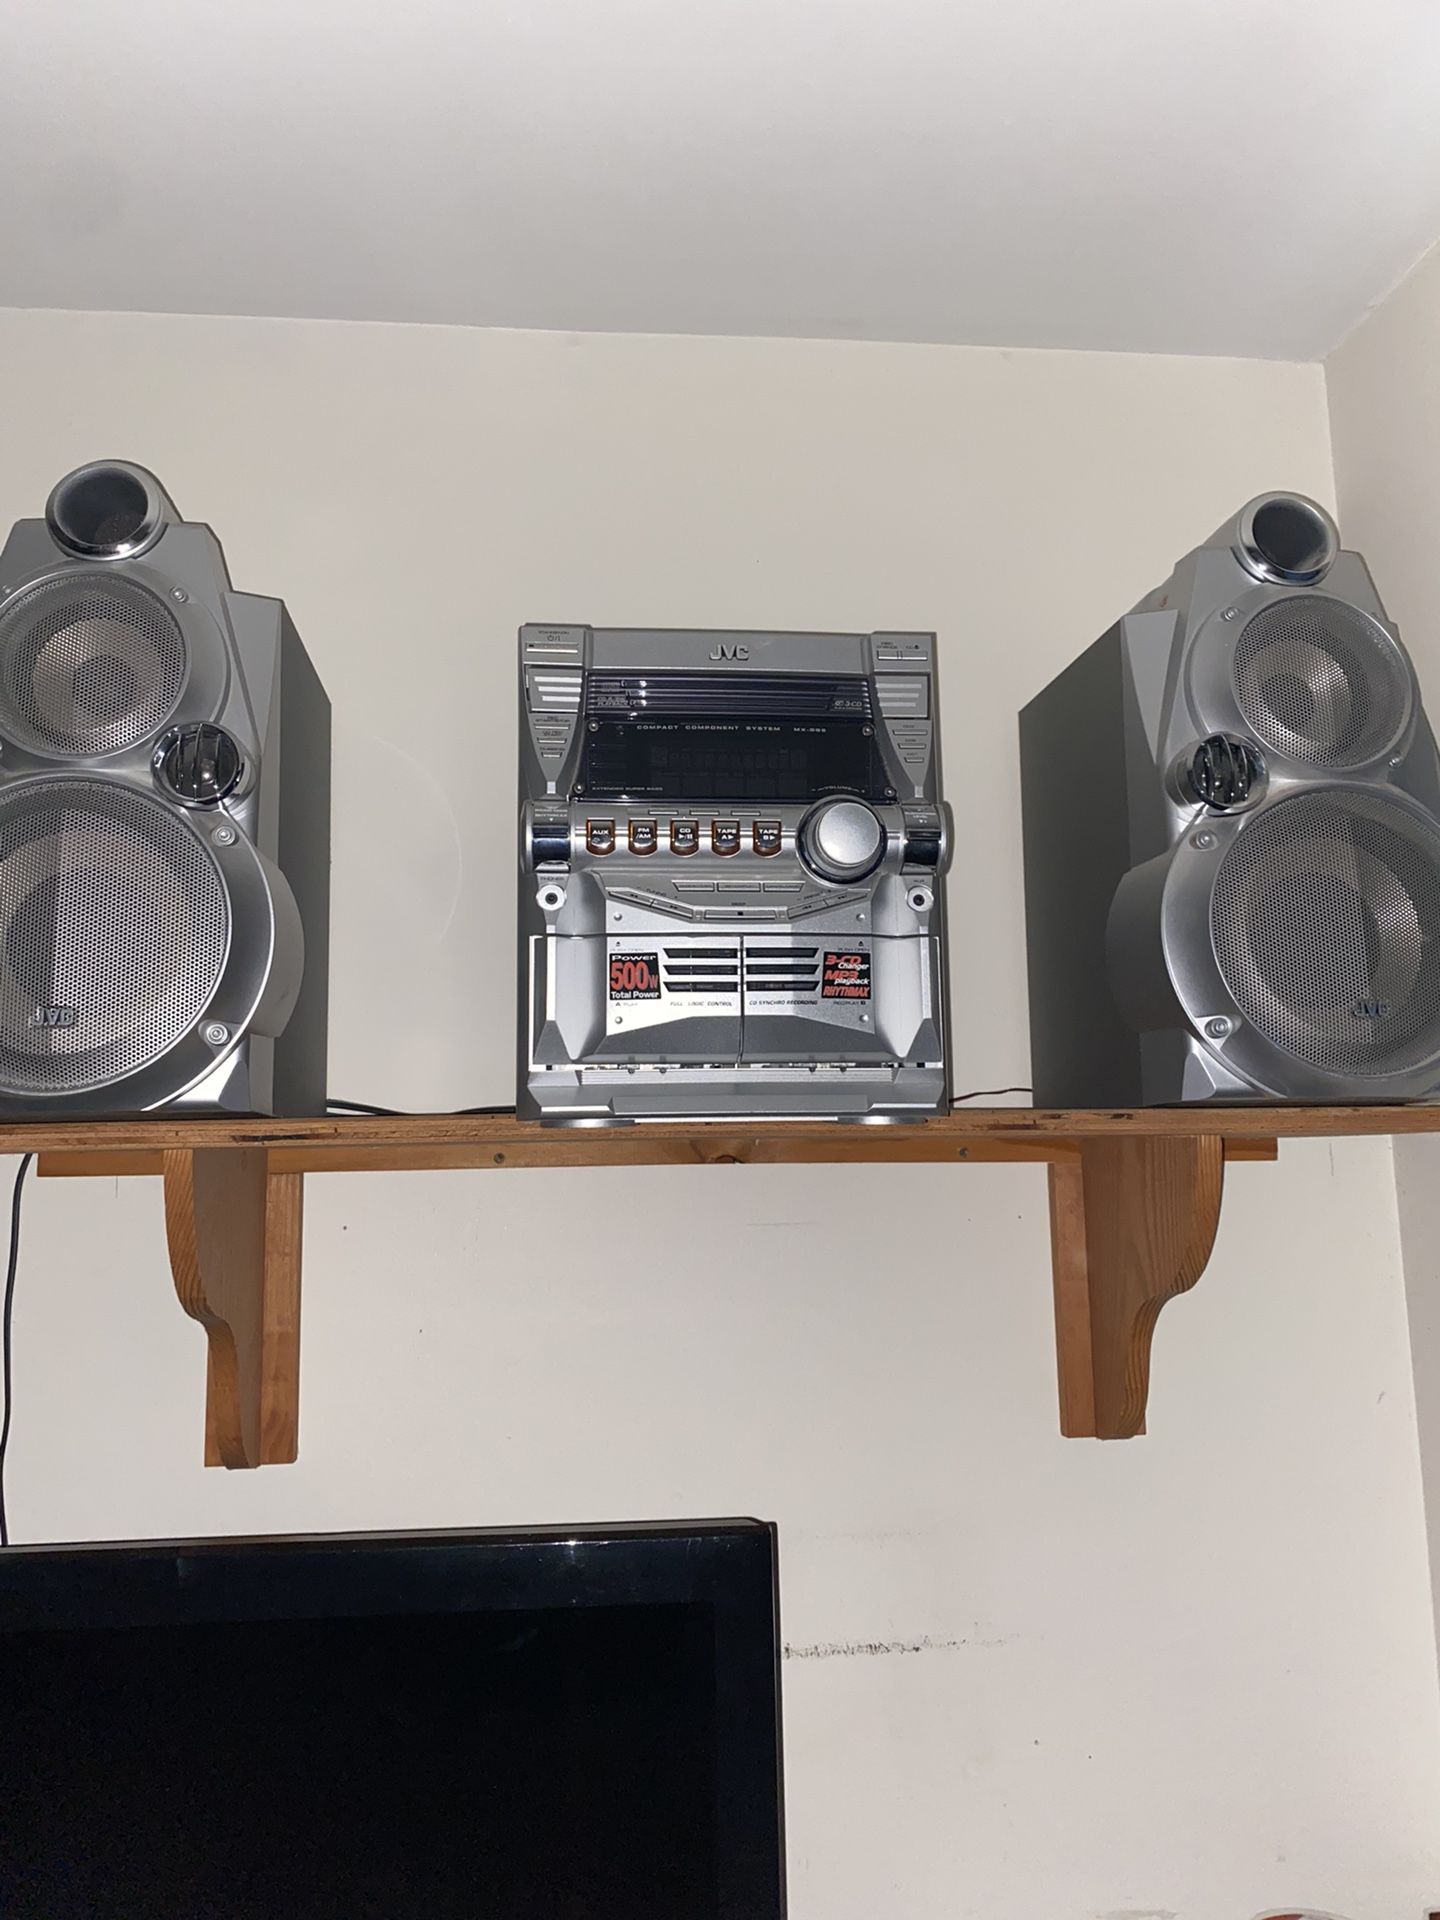 Stereo with speakers